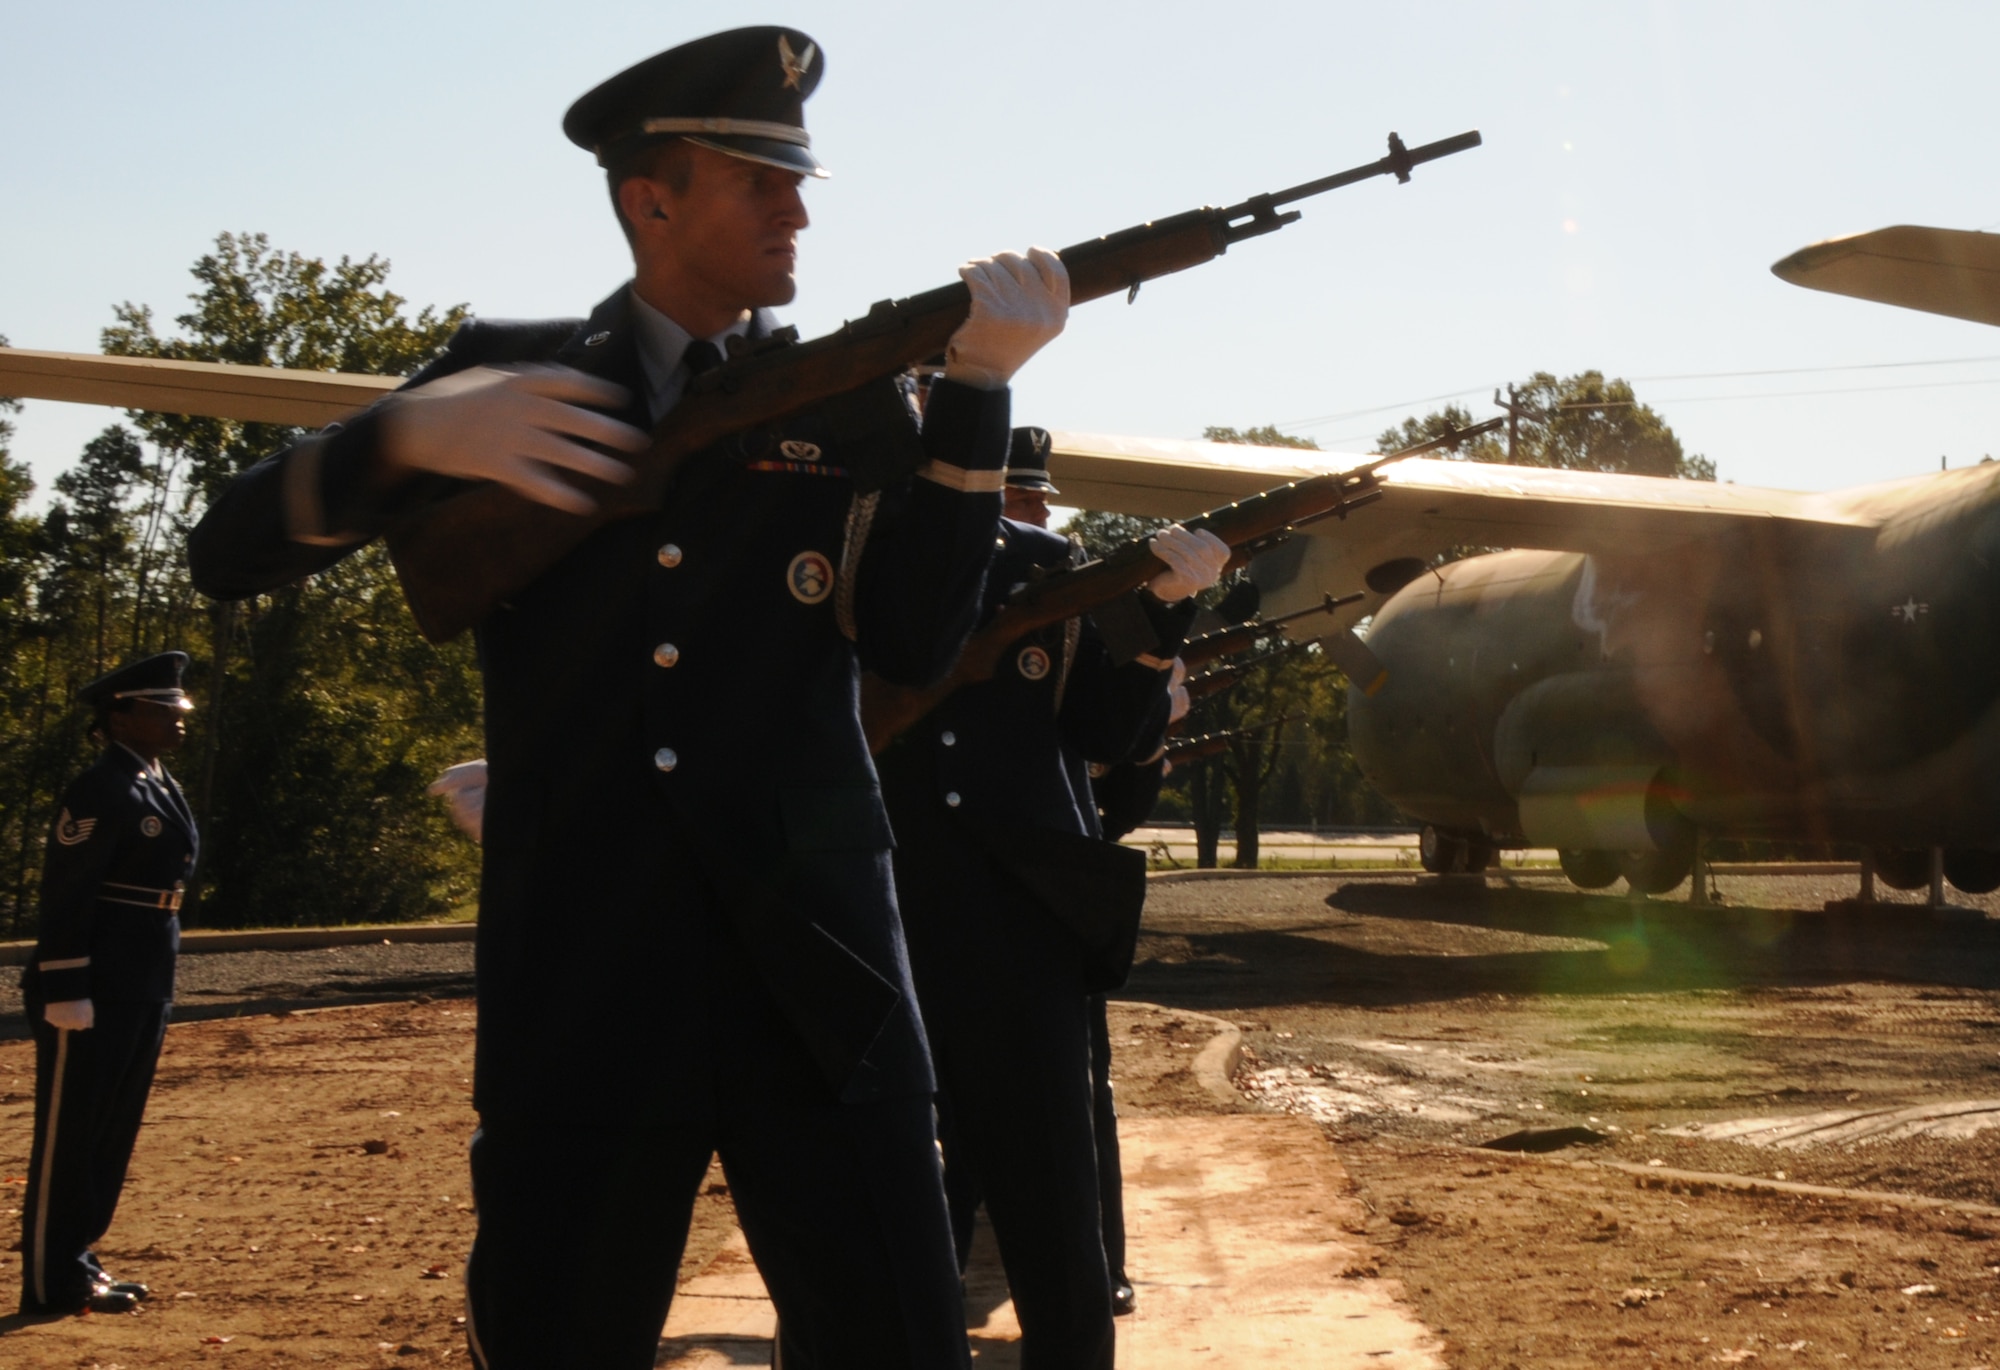 Charlotte, N.C. -- Senior Airman Jonathan Boseman of the 145 Airlift Wing Honor Guard fires his rifle as part of the twenty-one gun salute at the memorial service honoring North Carolin Air National Guardsmen deceased within the last year. (NCANG photo by Tech. Sgt. Rich Kerner)